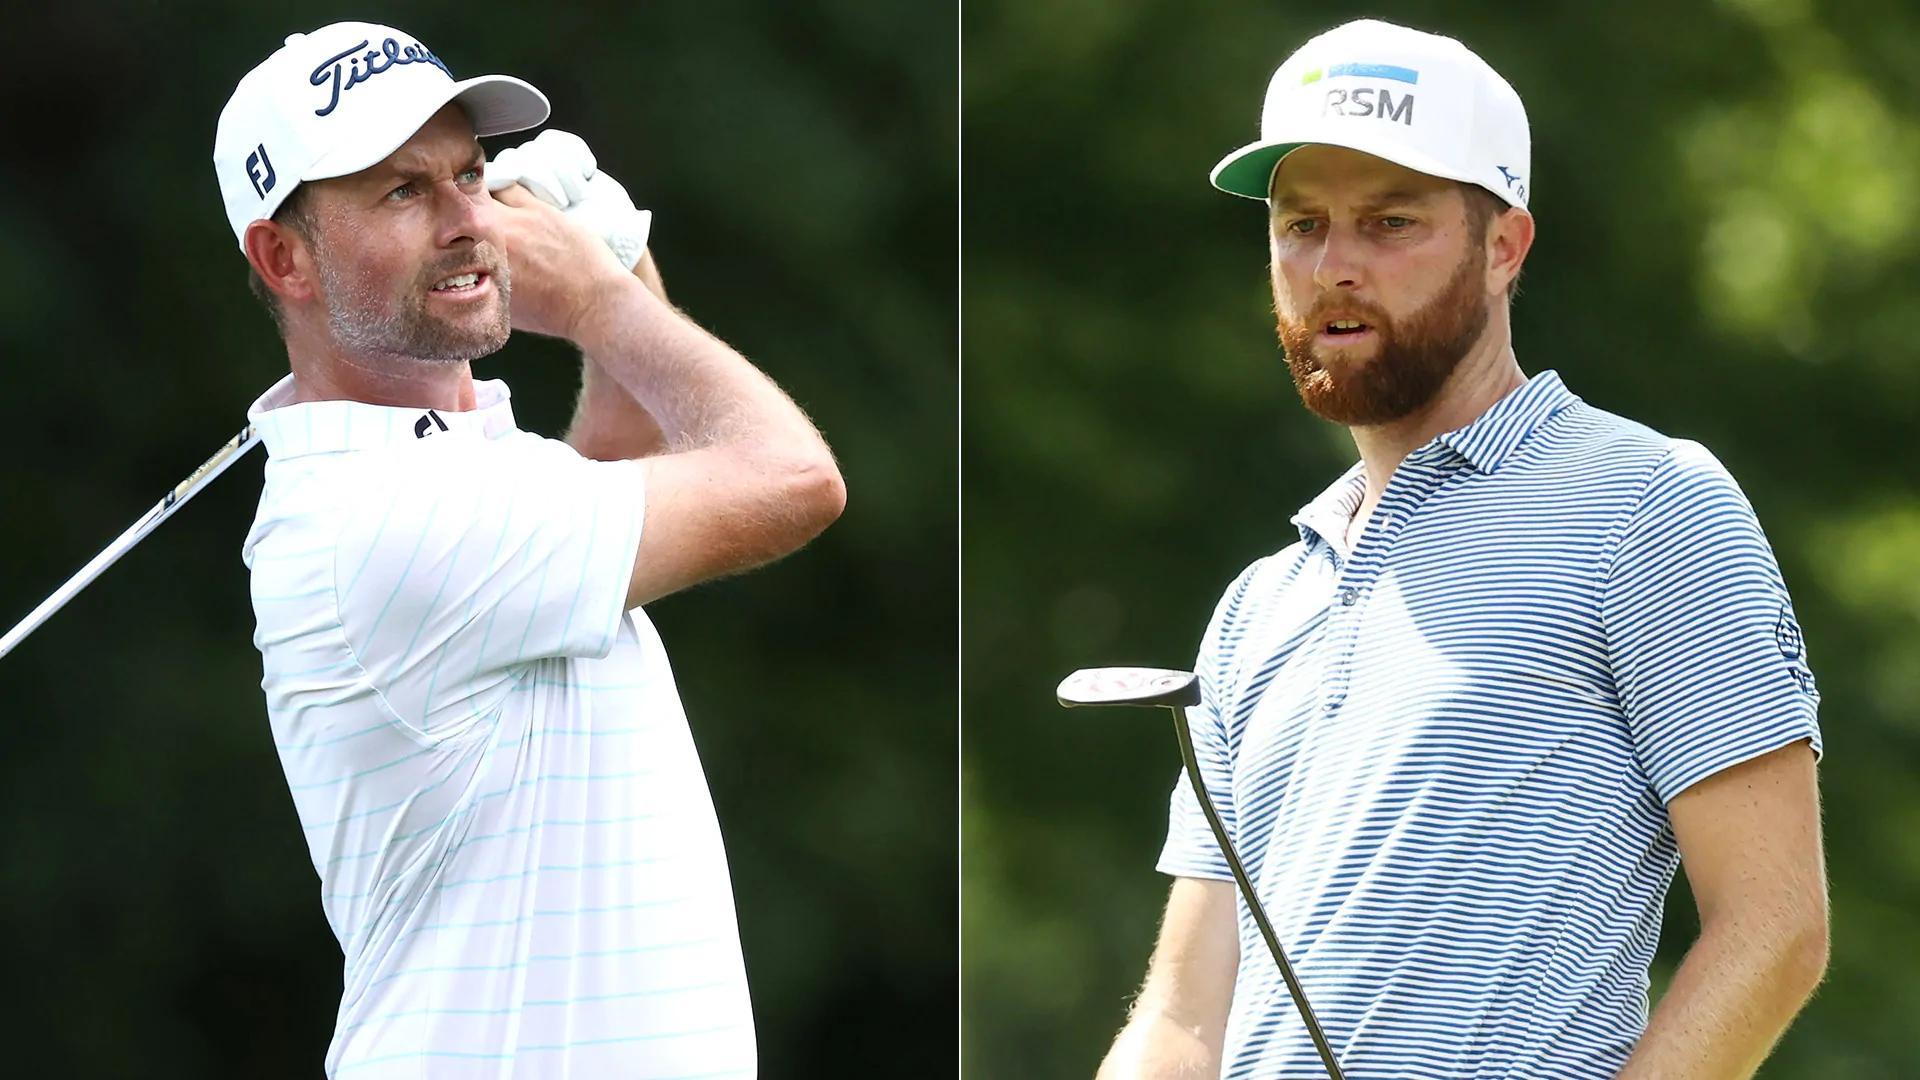 Webb Simpson, Chris Kirk share lead into weekend at Rocket Mortgage Classic